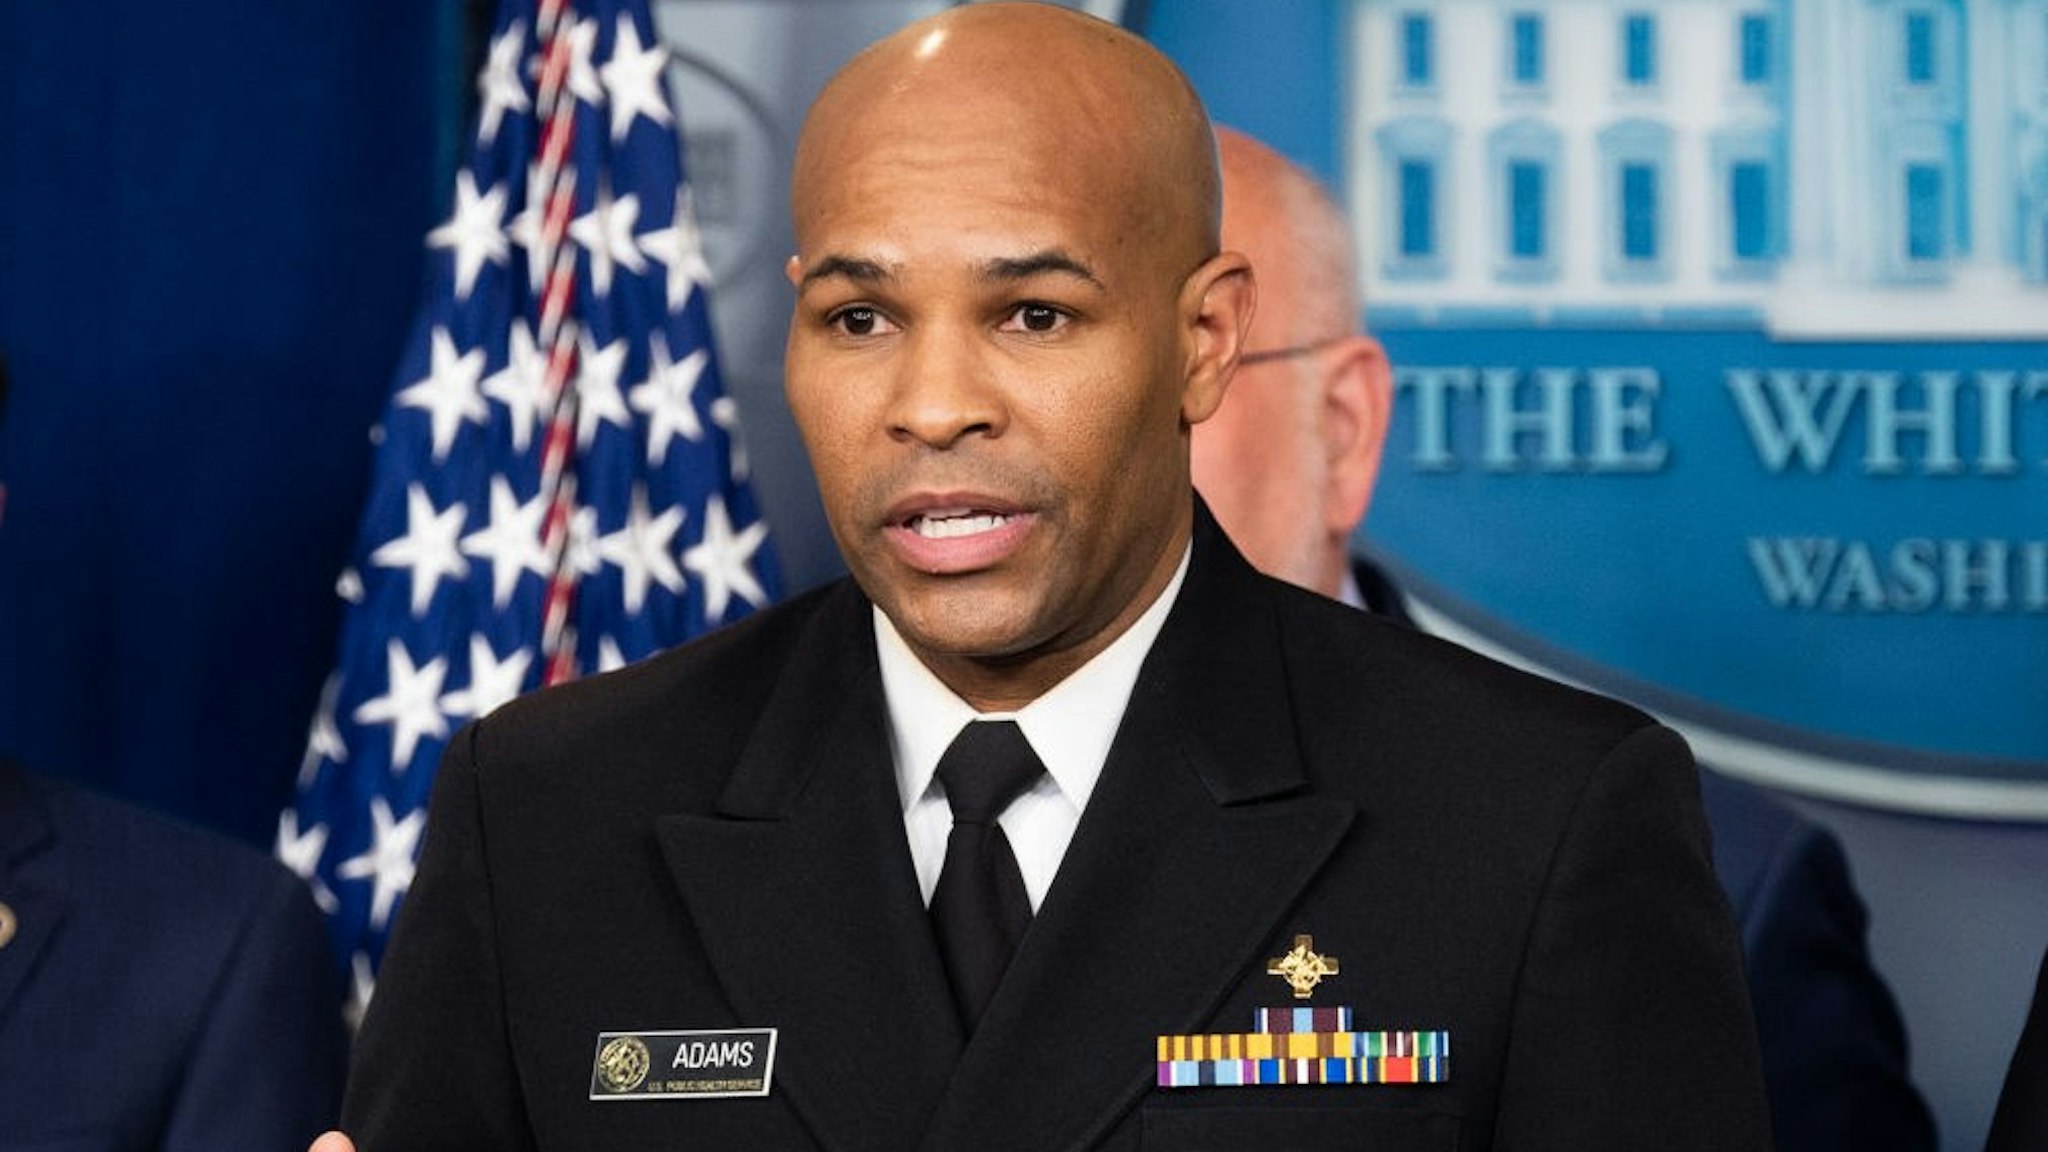 WASHINGTON, UNITED STATES - MARCH 09, 2020: Dr. Jerome Adams, Surgeon General of the United States speaks at the Coronavirus Task Force Press Conference.- PHOTOGRAPH BY Michael Brochstein / Echoes Wire/ Barcroft Studios / Future Publishing (Photo credit should read